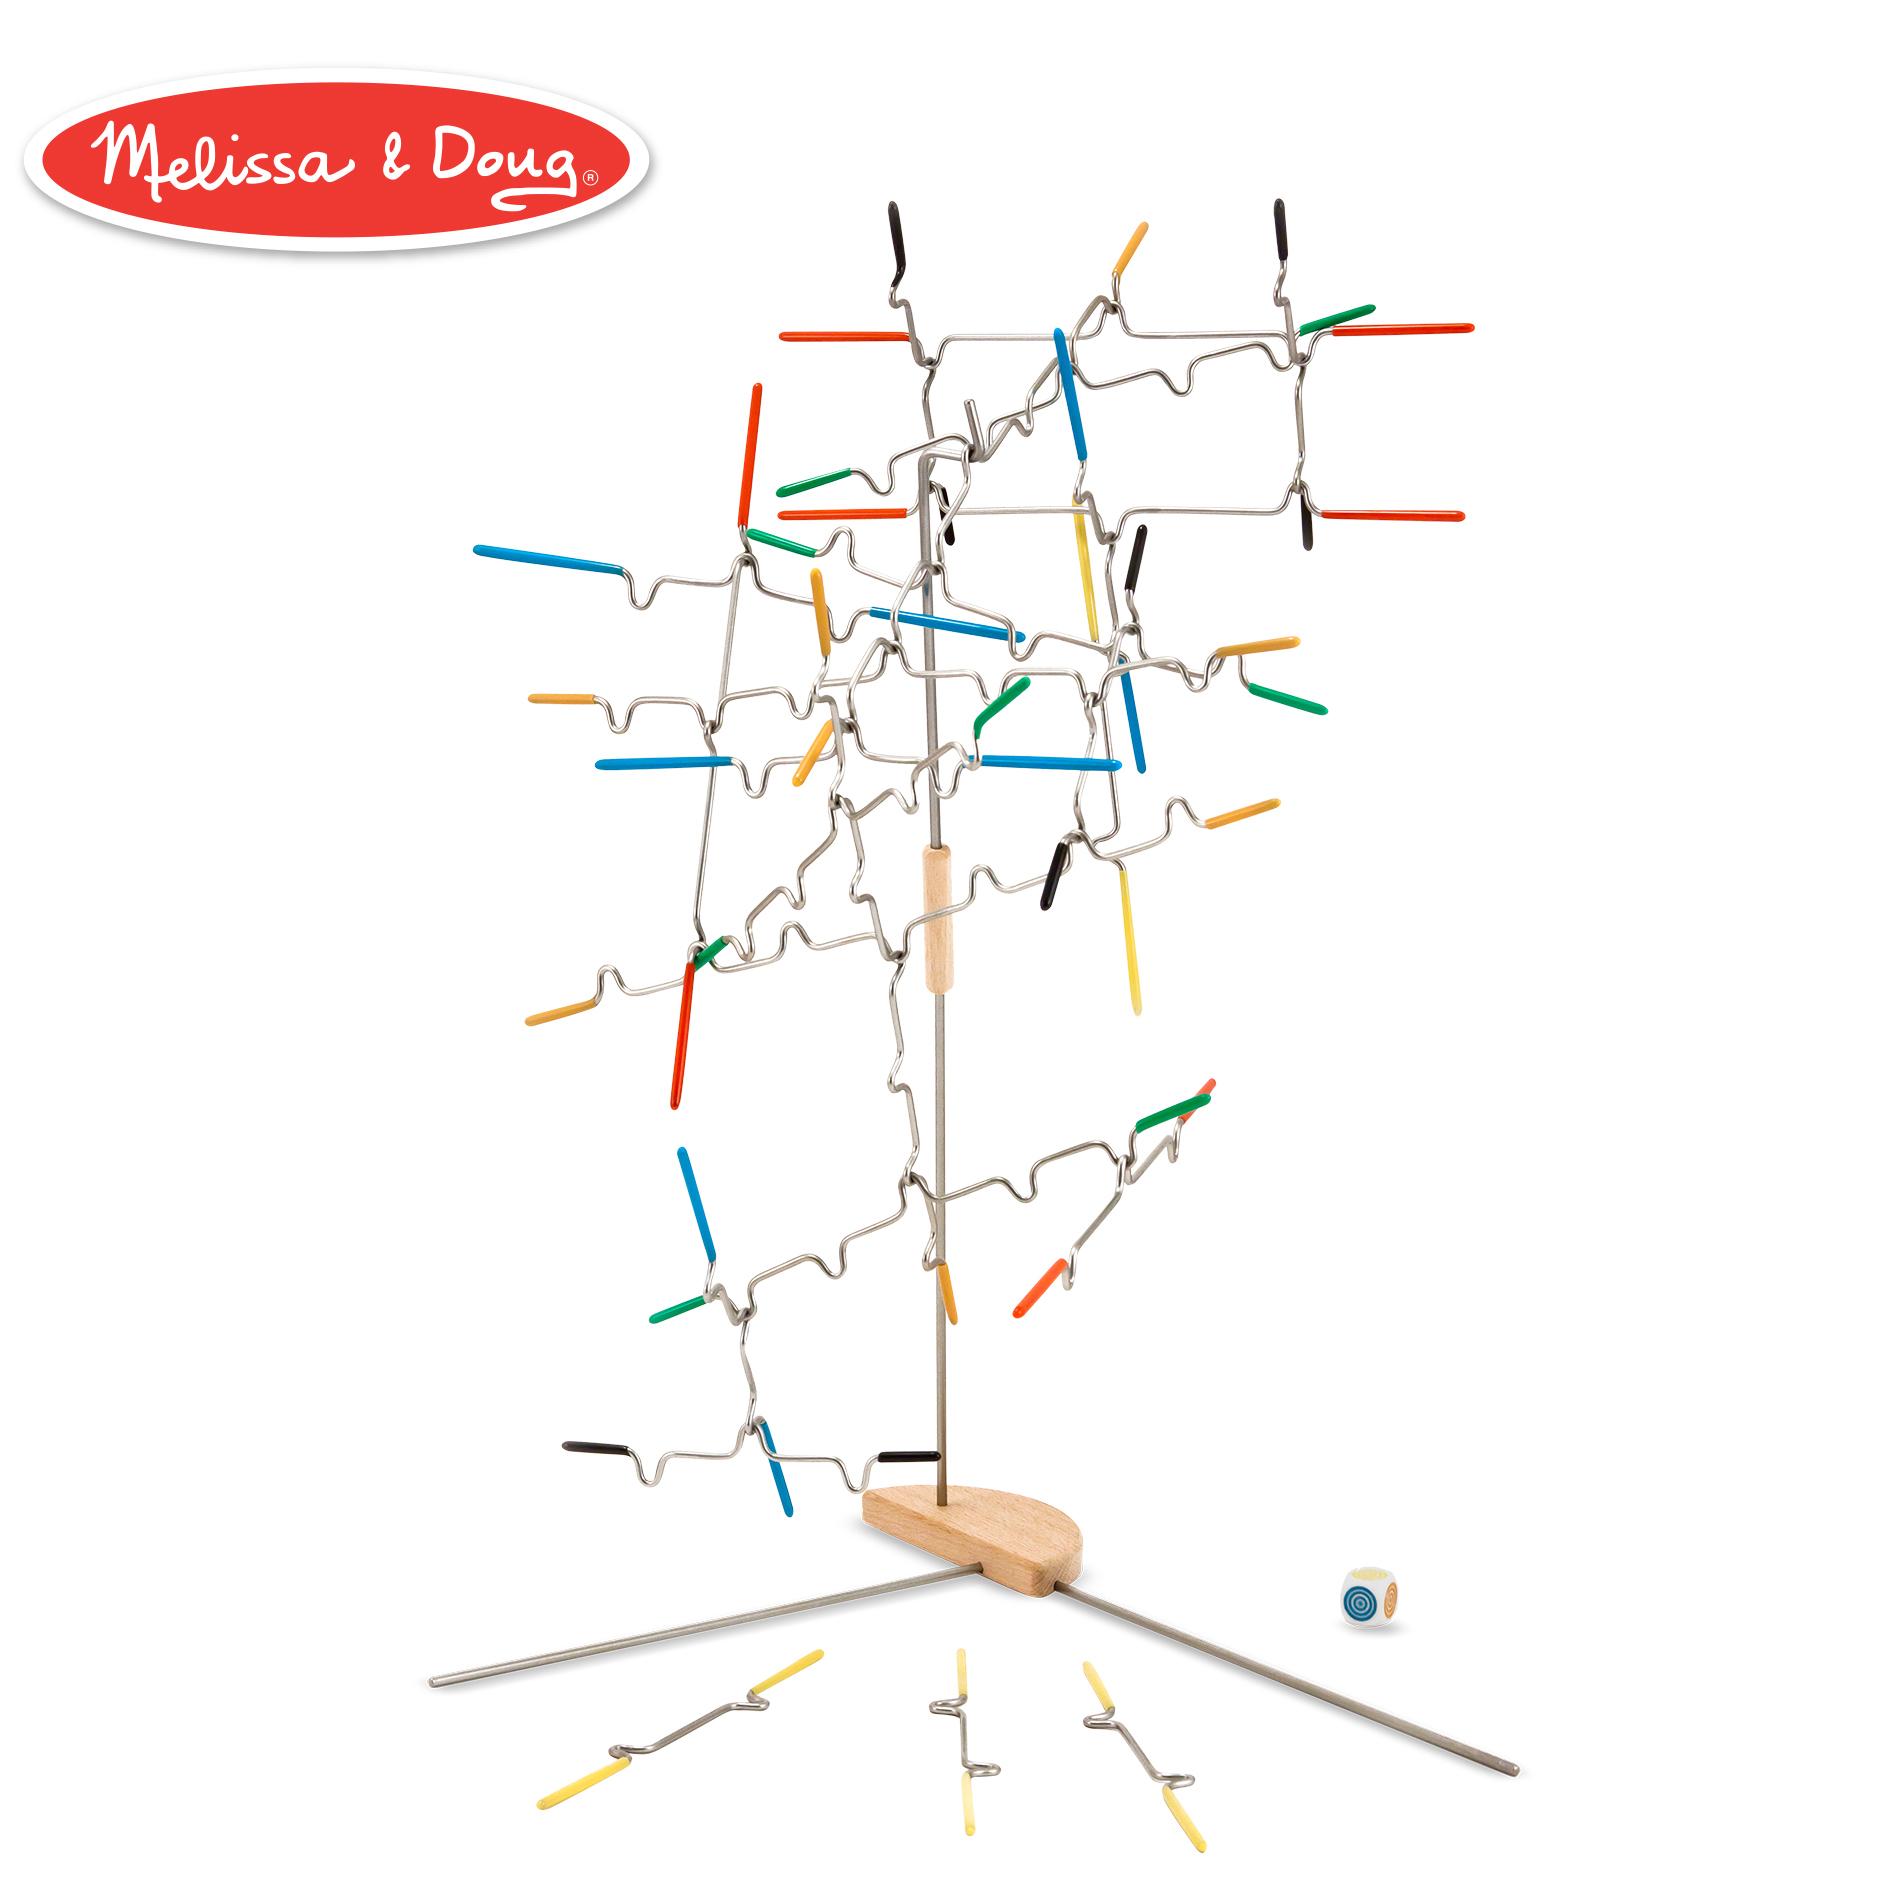 Melissa and Doug Suspend Family Game for $12.65